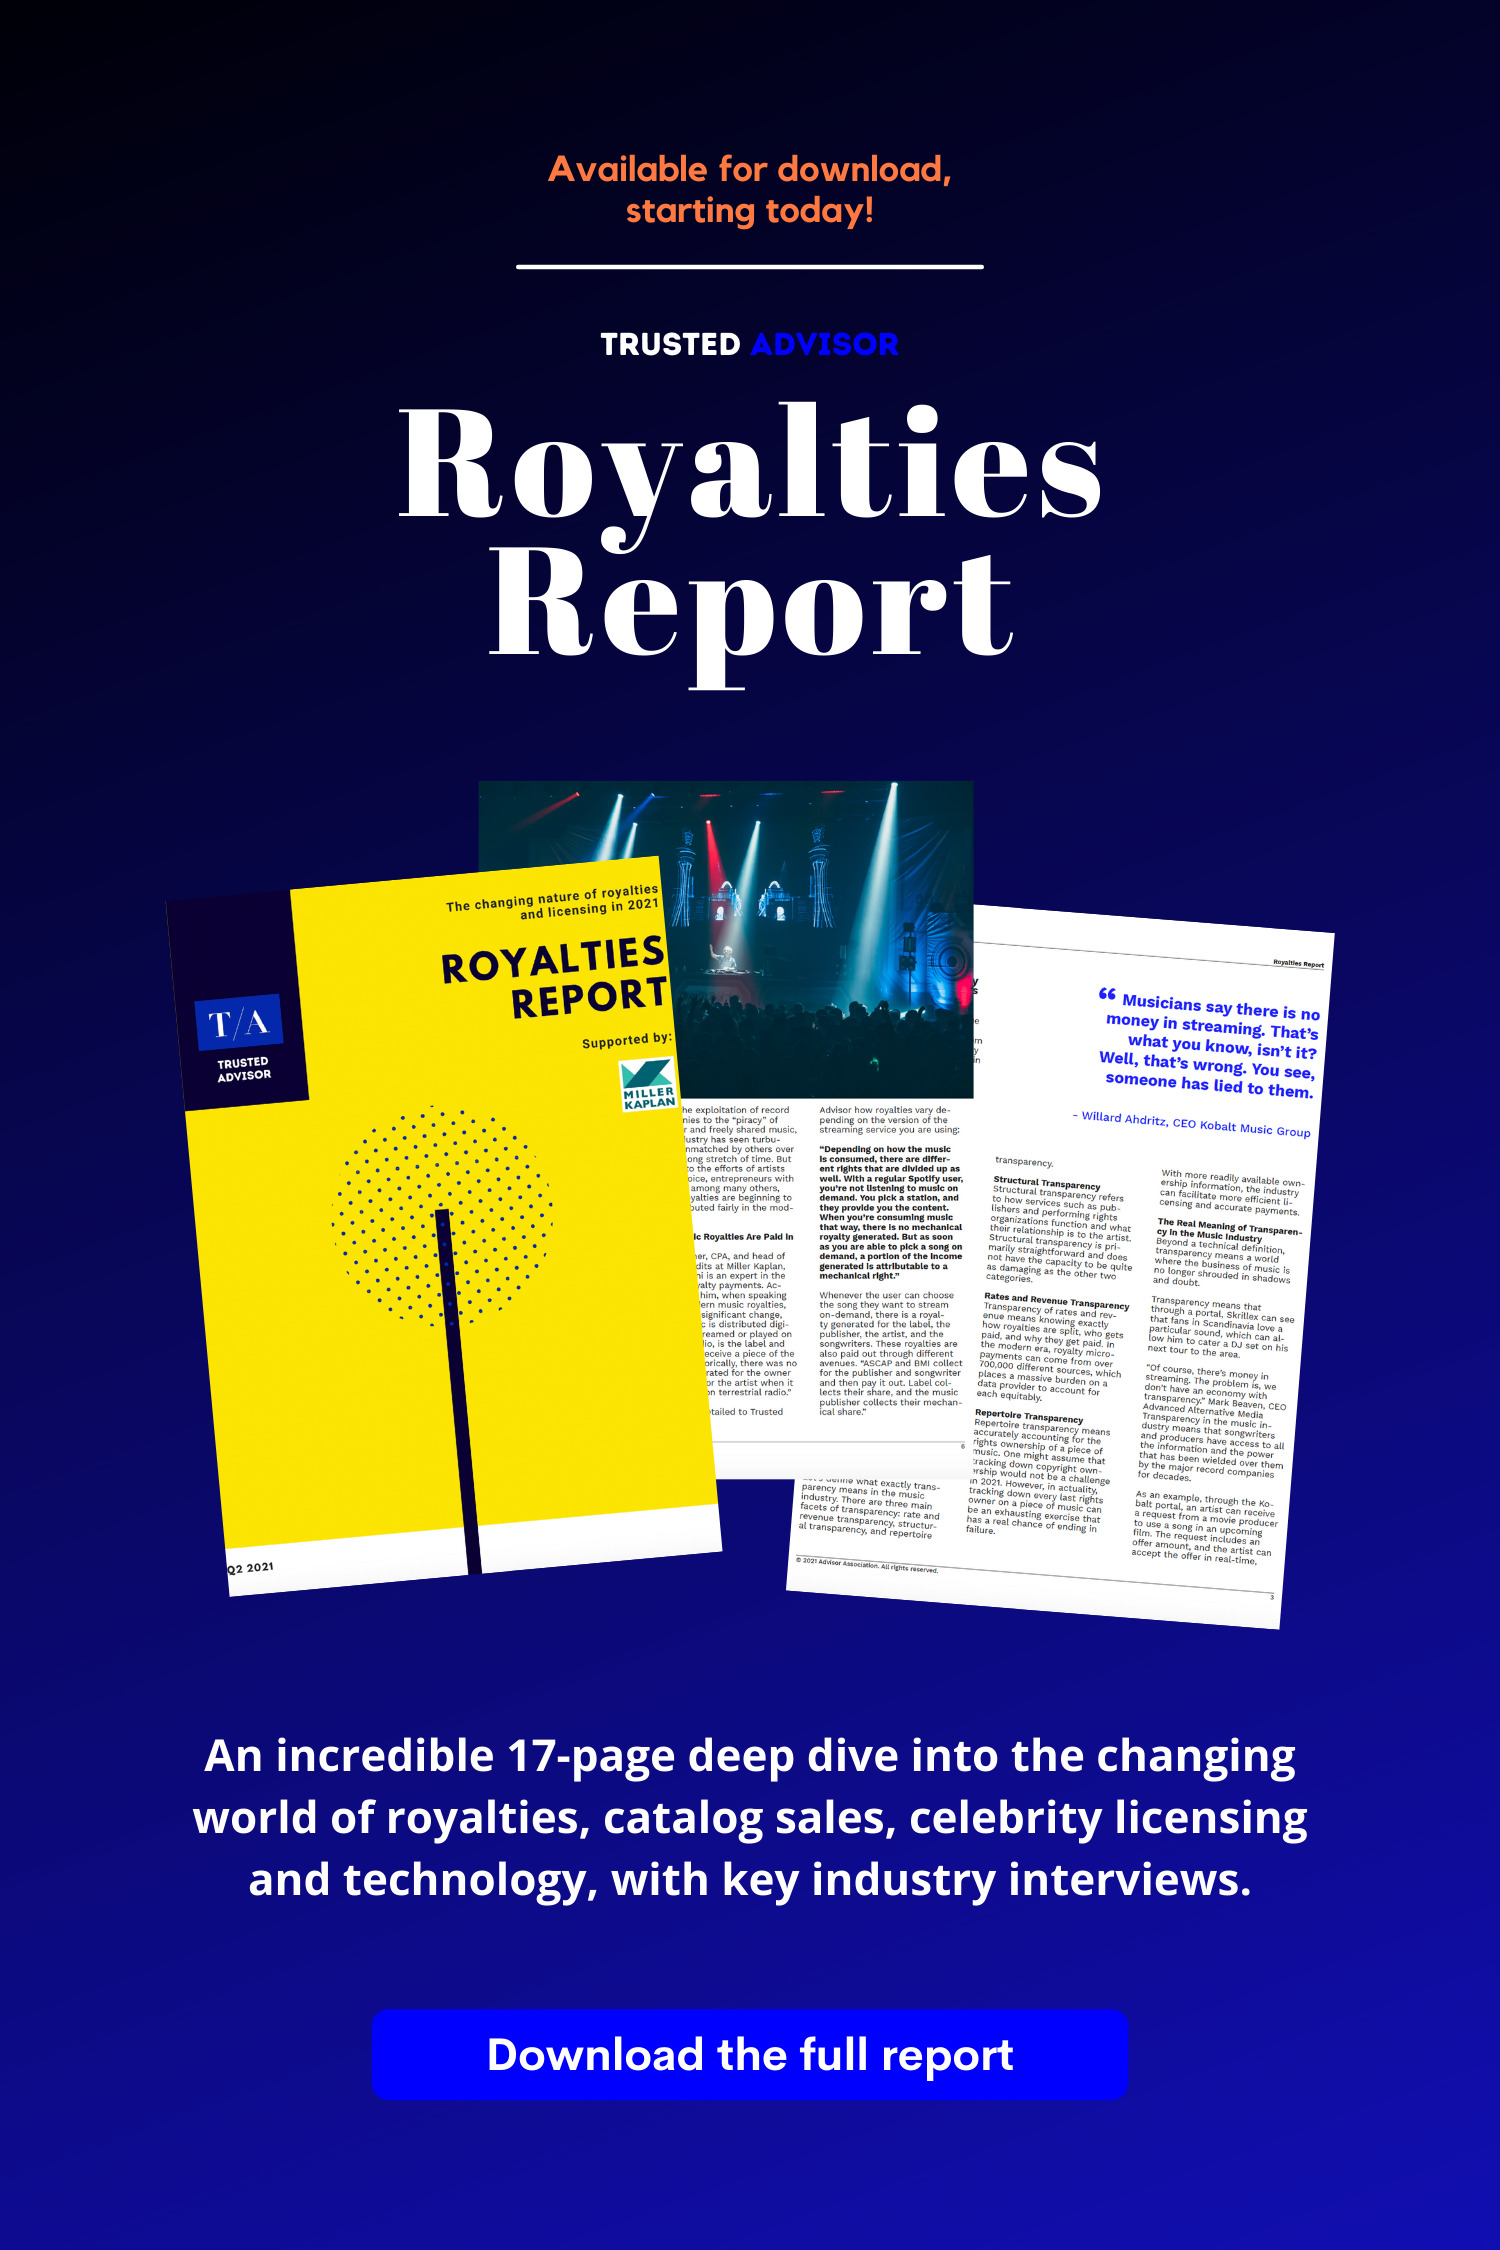 Royalties Report | The changing nature of royalties and licensing in 2021